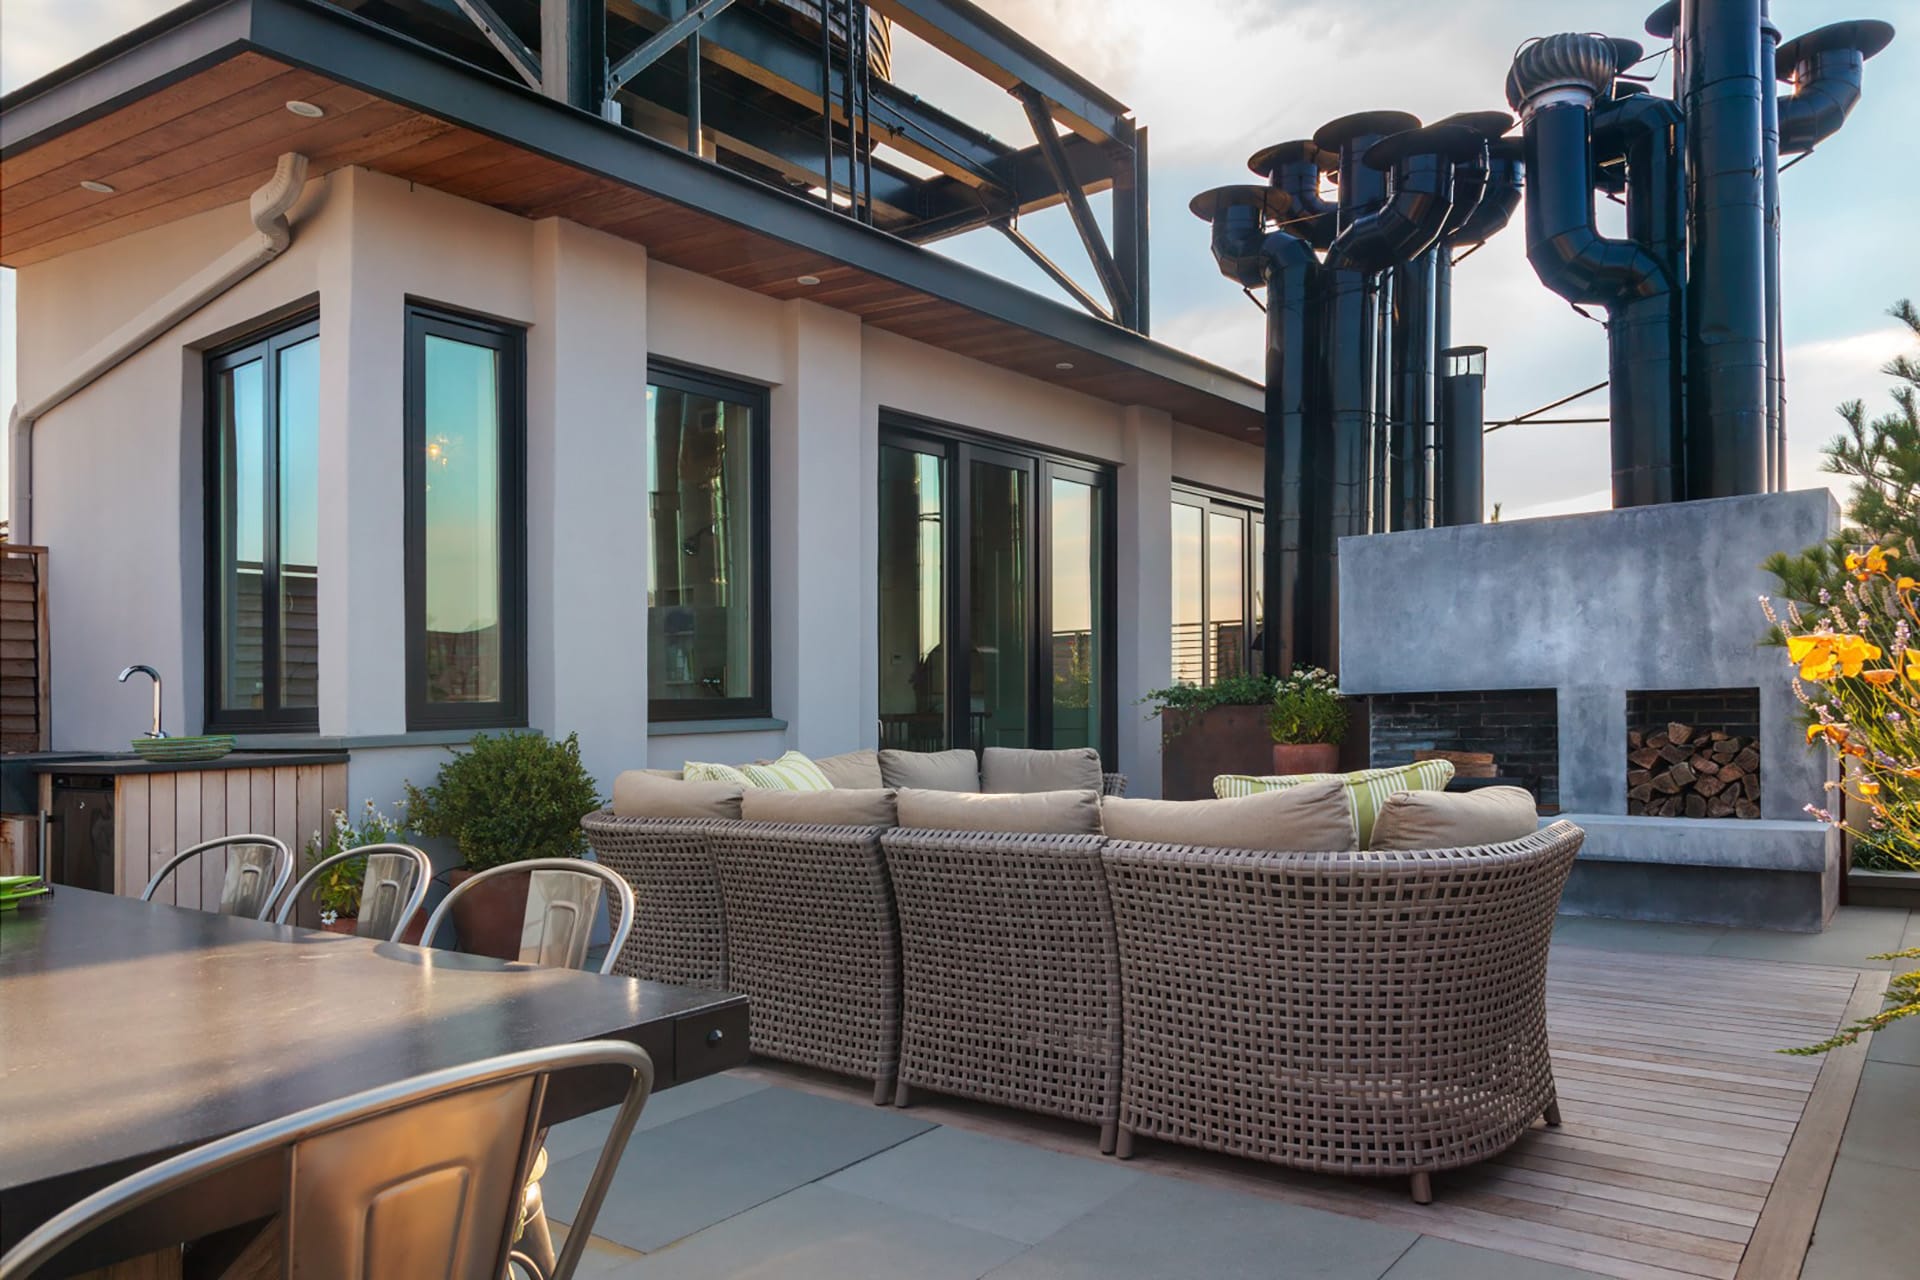 Roof deck with an outdoor seating area, kitchen, and wood-burning fireplace.